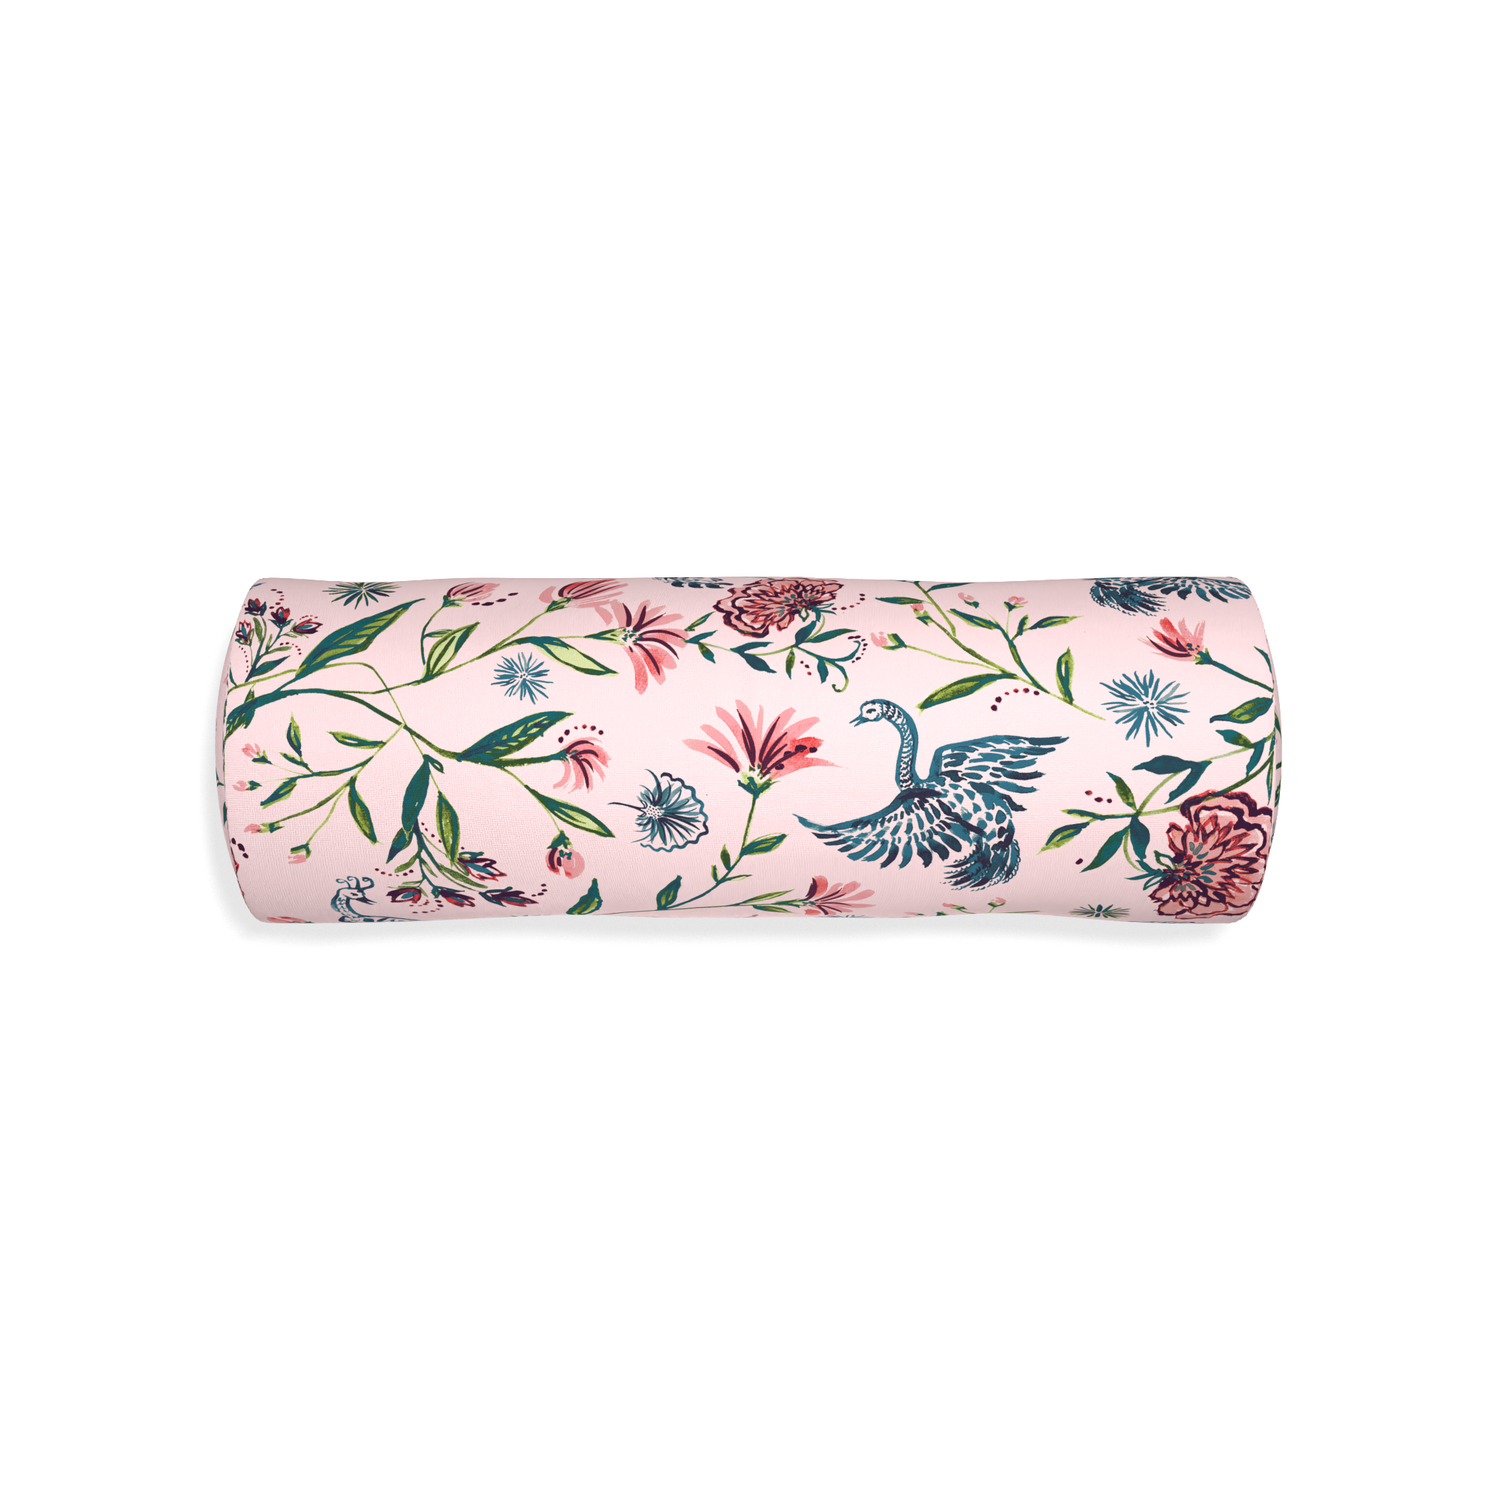 Bolster daphne rose custom rose chinoiseriepillow with none on white background